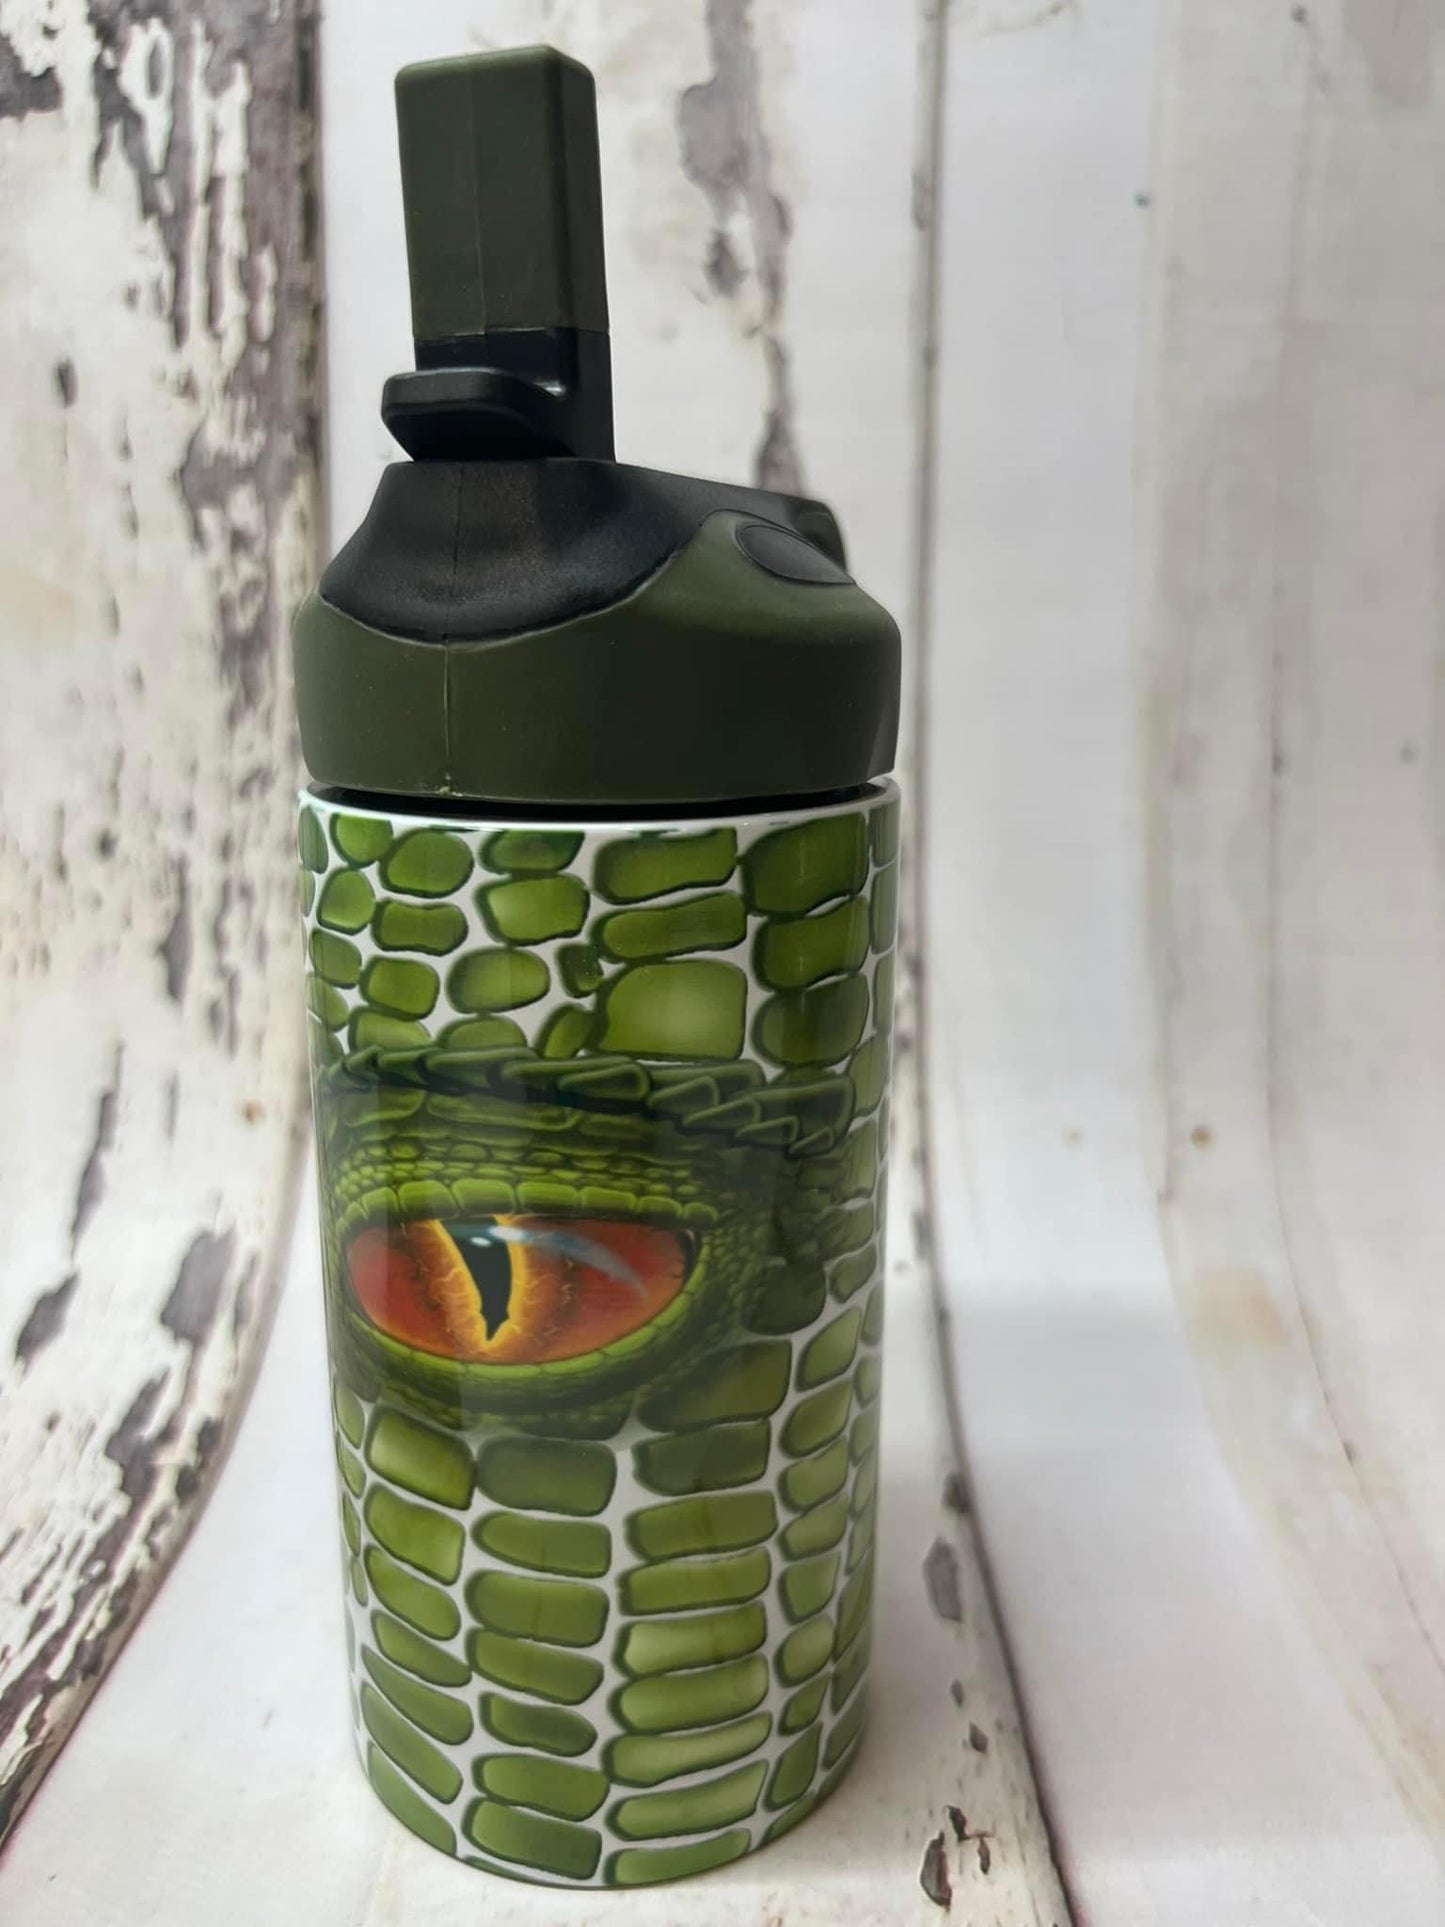 12oz Edgy Hydro Bottles | Sublimation | Volume Pricing | Patent Pending